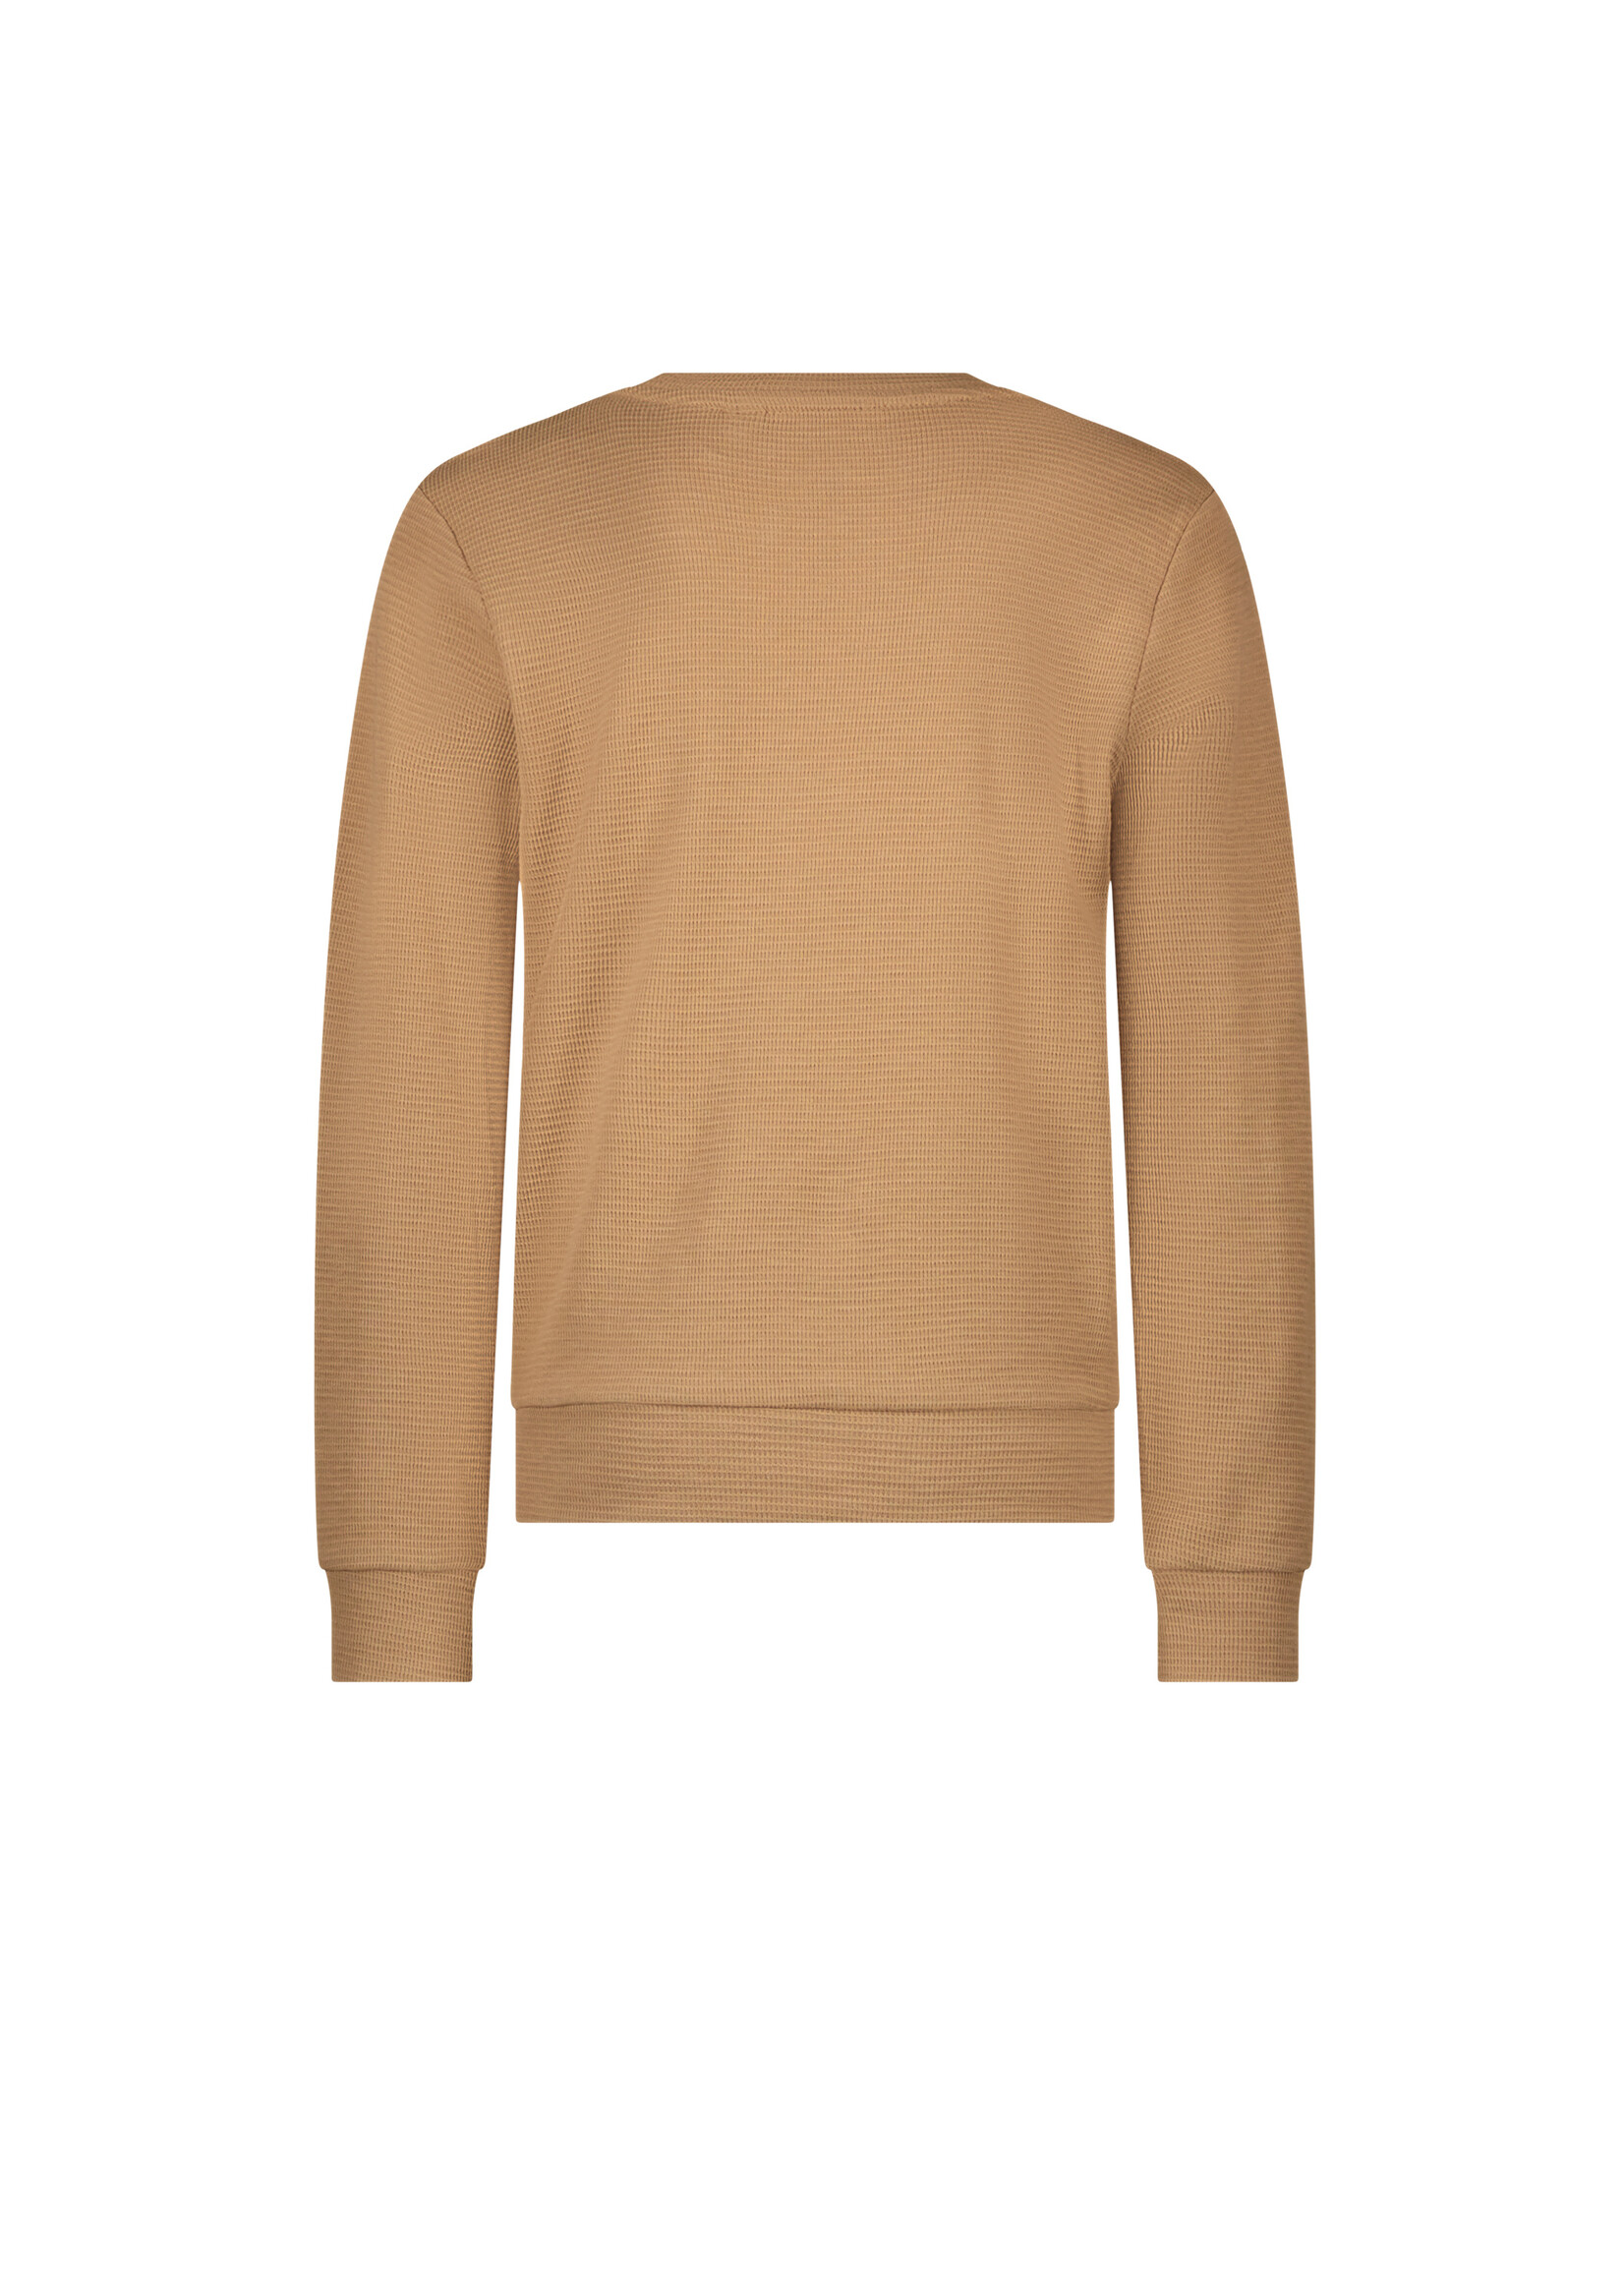 le chic garcon oliver sweater